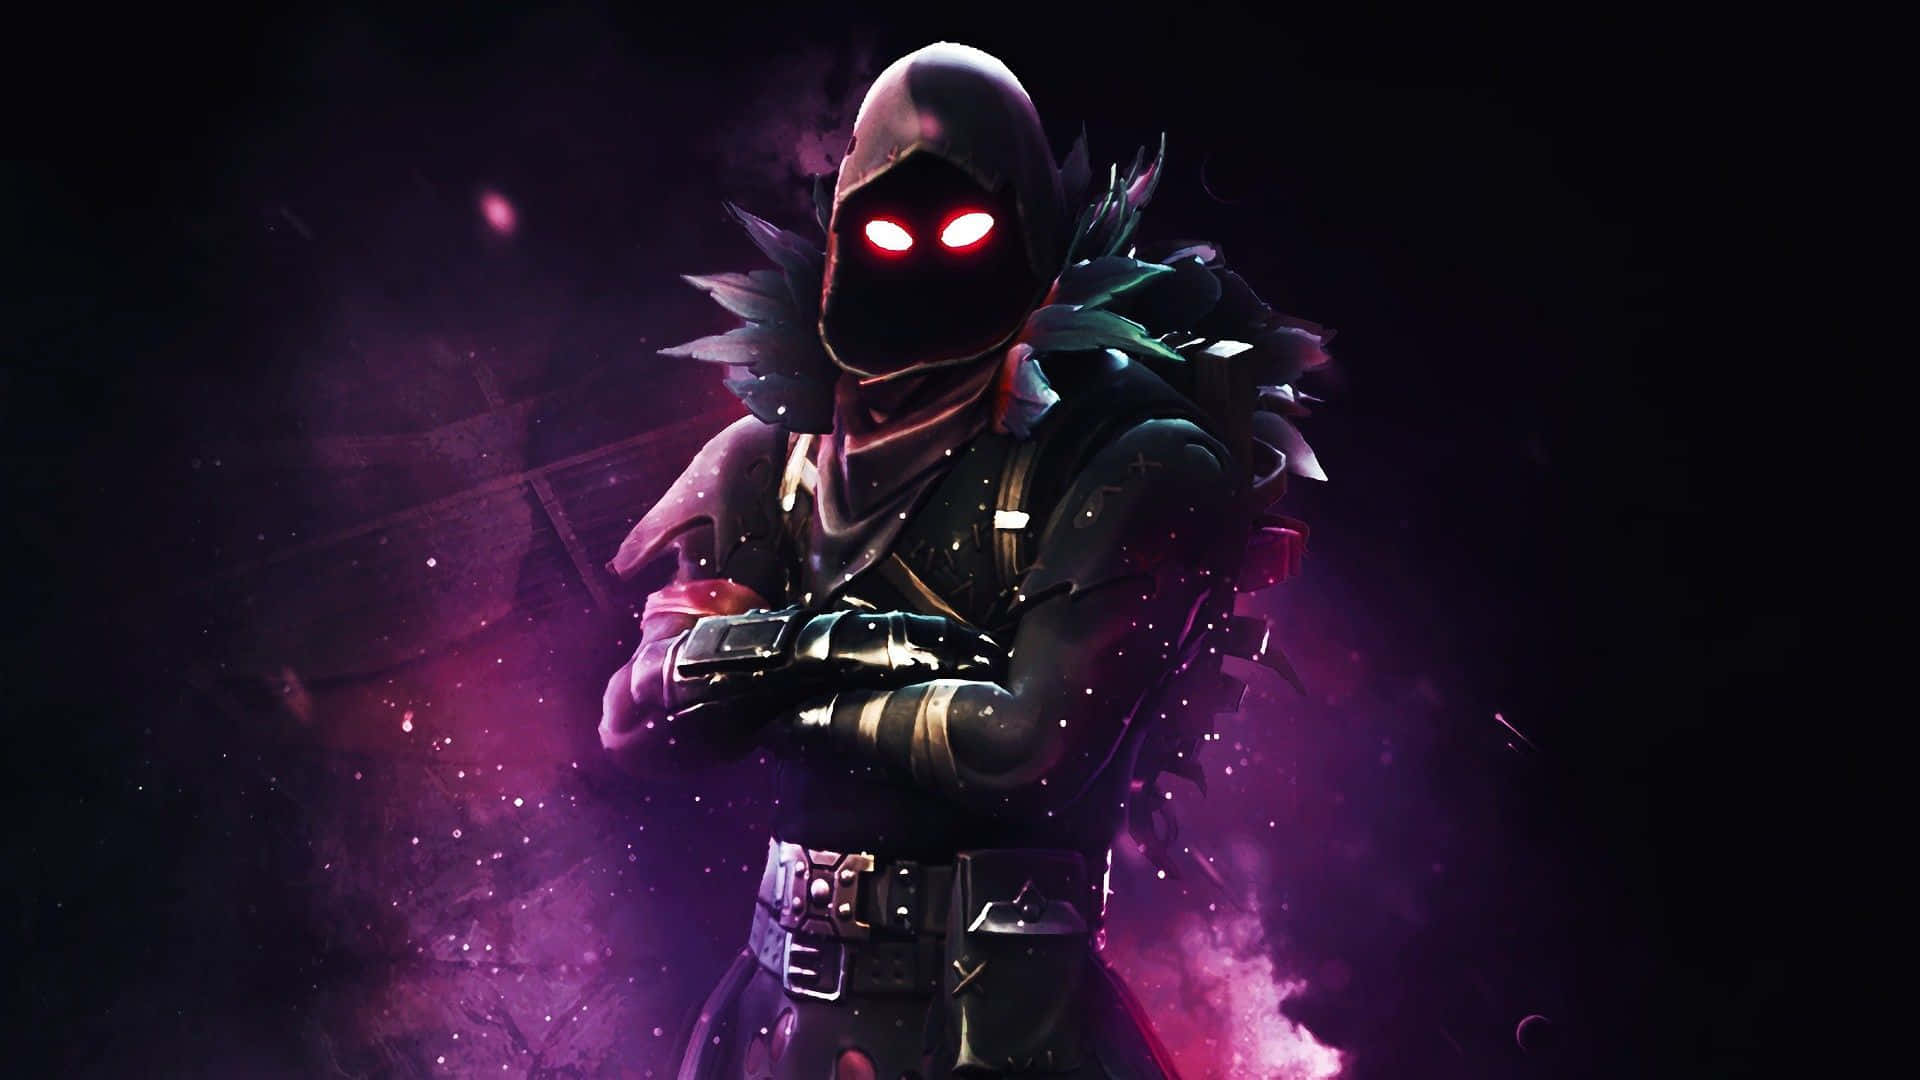 Fortnite's' New Raven Skin in Is a Fan Favorite for This Reason  Gaming  wallpapers, Best gaming wallpapers, Epic games fortnite